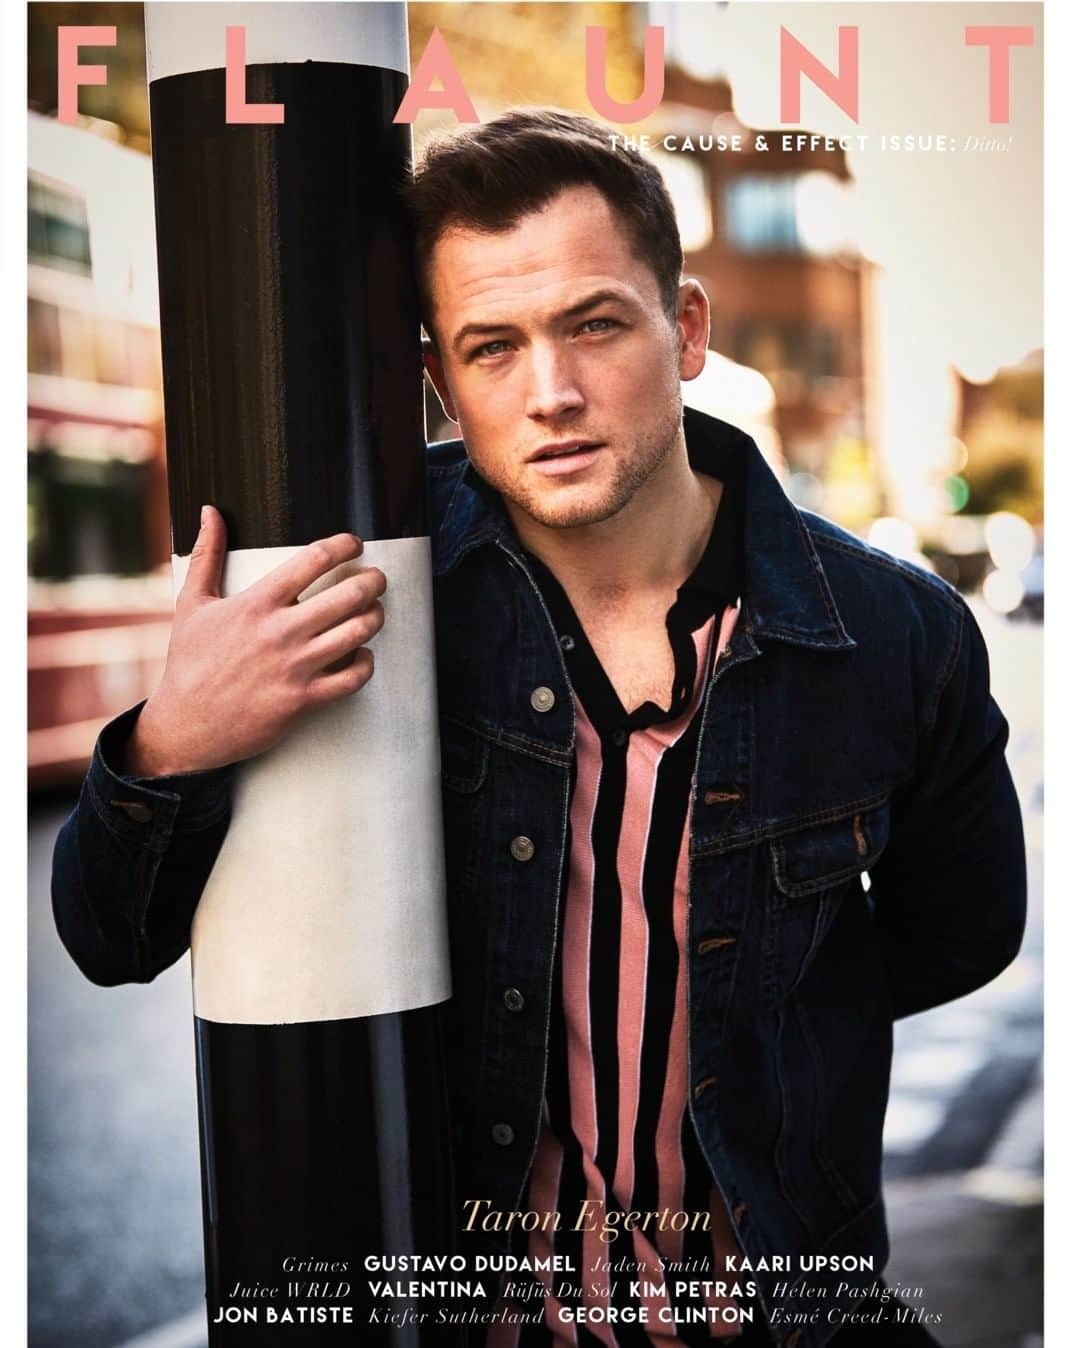 Flaunt Magazineさんのインスタグラム写真 - (Flaunt MagazineInstagram)「@Taron.Egerton on turning into Elton for the upcoming @RocketmanMovie: “Elton is just such a fascinating man, and I really like him. I’d probably go as far as to say I love him, and that’s exciting—to be portraying someone that you care about. I actually feel defensive of him, and I feel like I want the world to see him as I see him, which is not perfect. It’s absolutely not perfect. Our movie is very much about starting in a place of tension and defensiveness, and peeling those layers away.” from #TheCauseandEffectIssue #165, on newsstands! order your copy now (Link in bio). ⠀⠀⠀⠀⠀⠀⠀⠀⠀ ⠀⠀⠀⠀⠀⠀⠀⠀⠀ wearing @BENSHERMANofficial⠀⠀⠀⠀⠀⠀⠀⠀⠀ ⠀⠀⠀⠀⠀⠀⠀⠀⠀ Photographed by: @instamaxmonty. ⠀⠀⠀⠀⠀⠀⠀⠀⠀ Stylist: @stylegazer1. ⠀⠀⠀⠀⠀⠀⠀⠀⠀ Groomer: @joemillshair Written by: @johnpaul_thesirensoftitan ⠀⠀⠀⠀⠀⠀⠀⠀ ⠀⠀⠀⠀⠀⠀⠀⠀⠀ #flaunt #flauntmagazine #taronegerton #bensherman #rocketman #eltonjohn @eltonjohn」5月3日 22時01分 - flauntmagazine